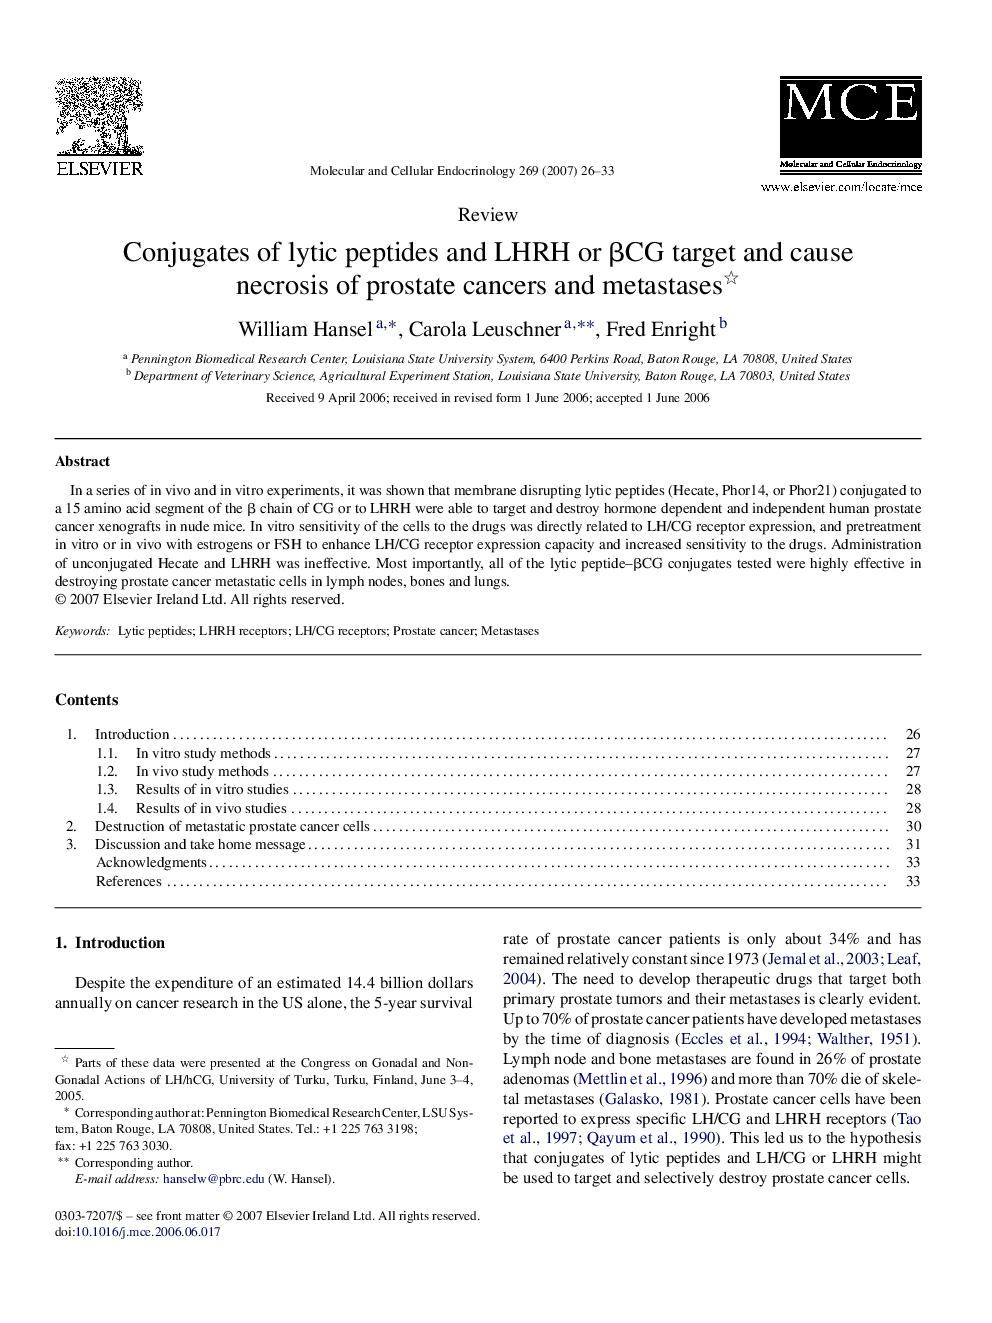 Conjugates of lytic peptides and LHRH or βCG target and cause necrosis of prostate cancers and metastases 